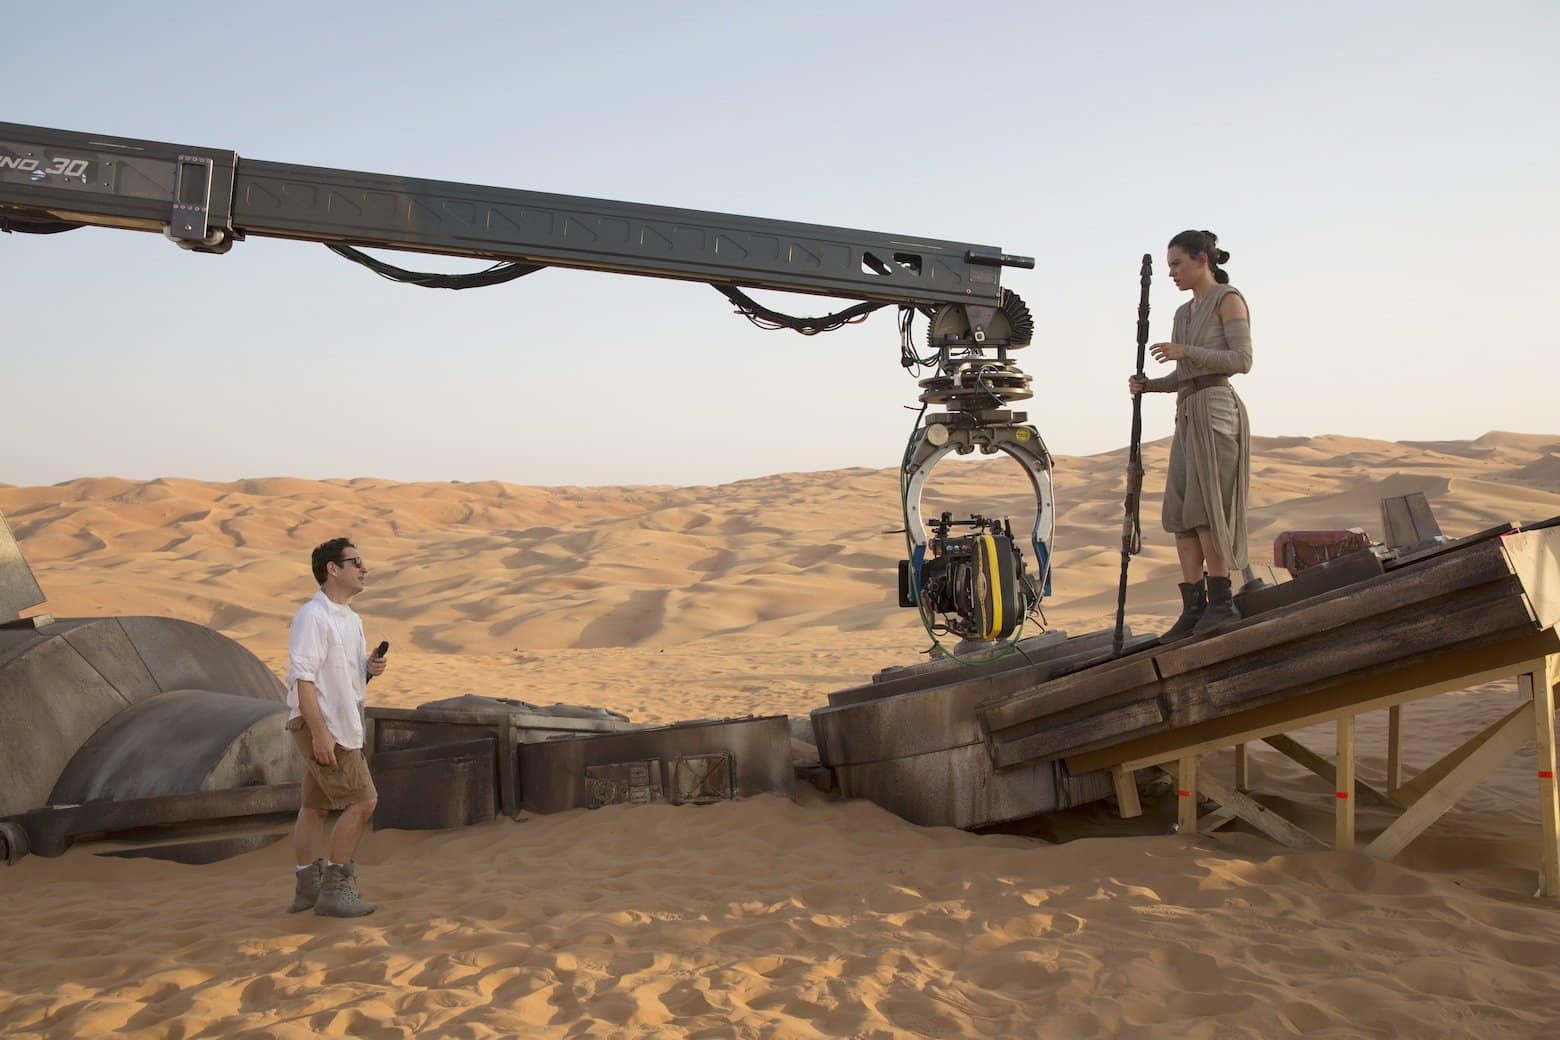 Star Wars VII The Force Awakens 13 - JJ Abrams and Daisy Ridley on set